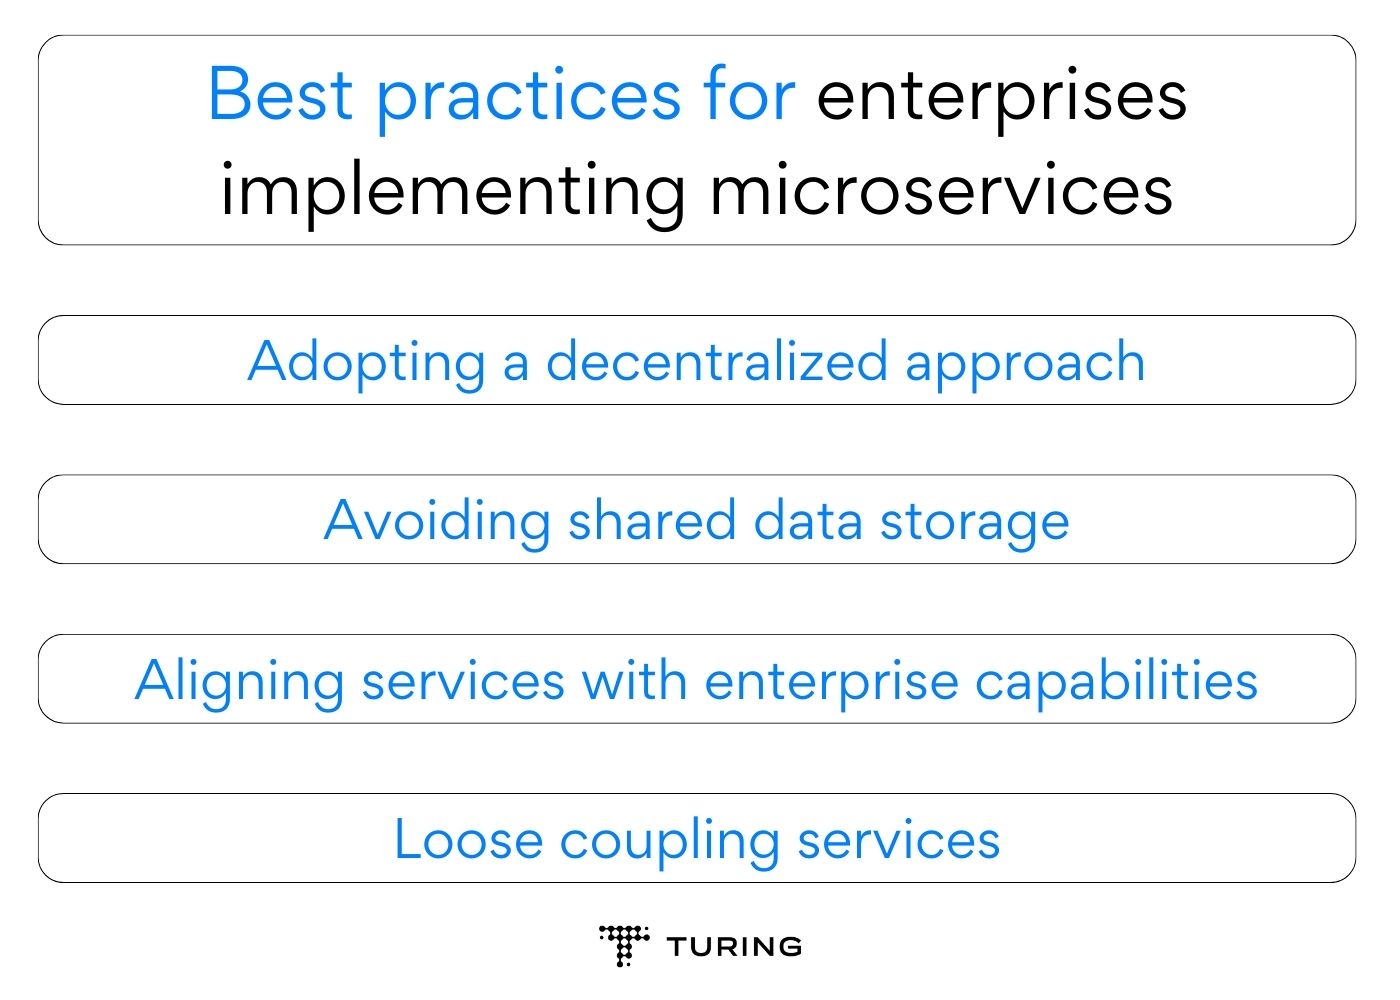 Best practices for enterprises implementing microservices